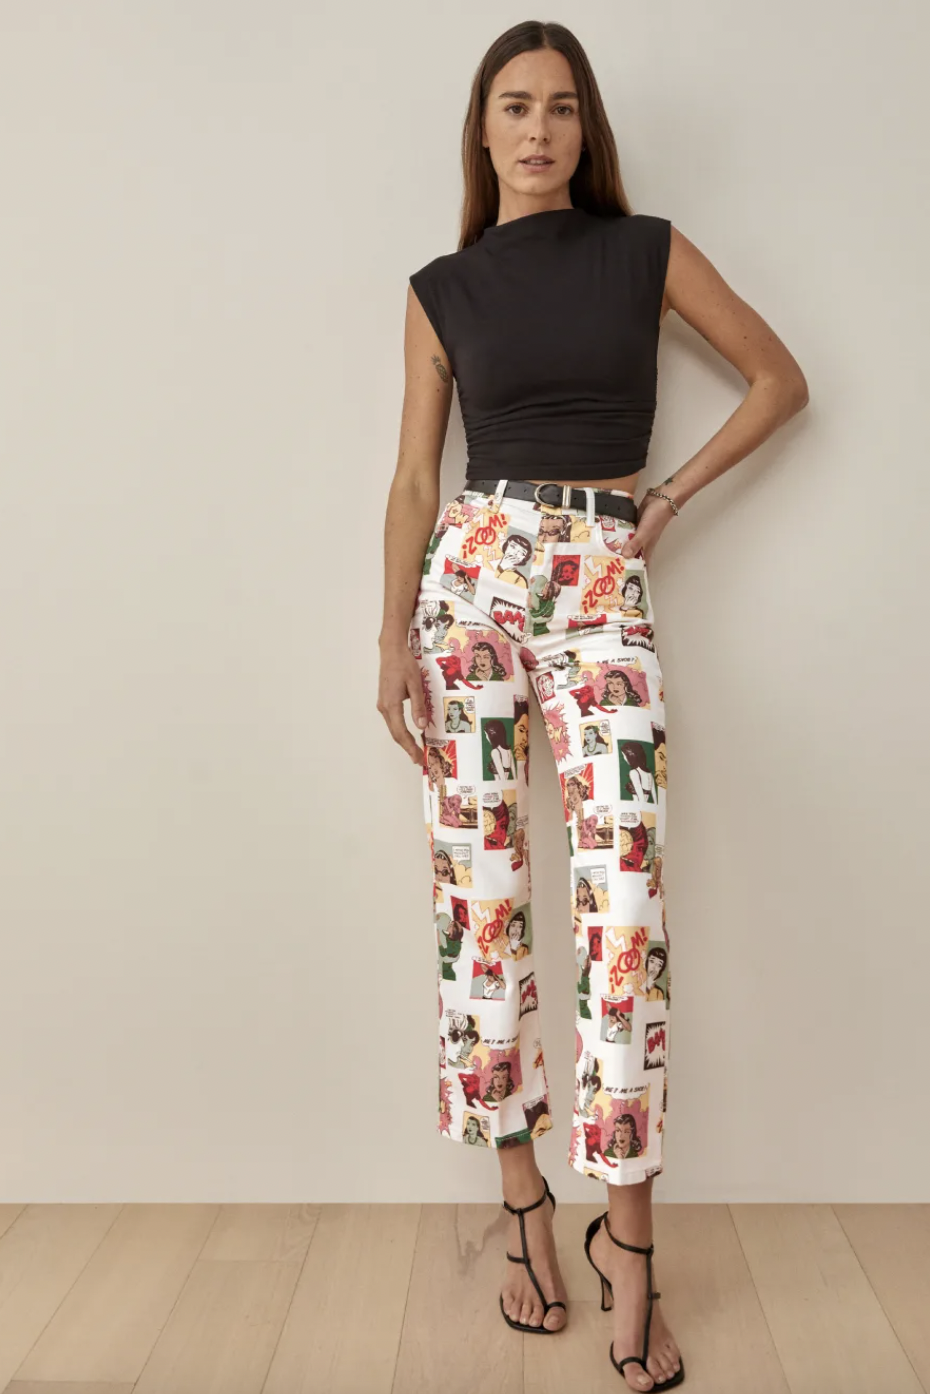 Best Patterned Pants for 2023 - Stylish Printed Pants for Women